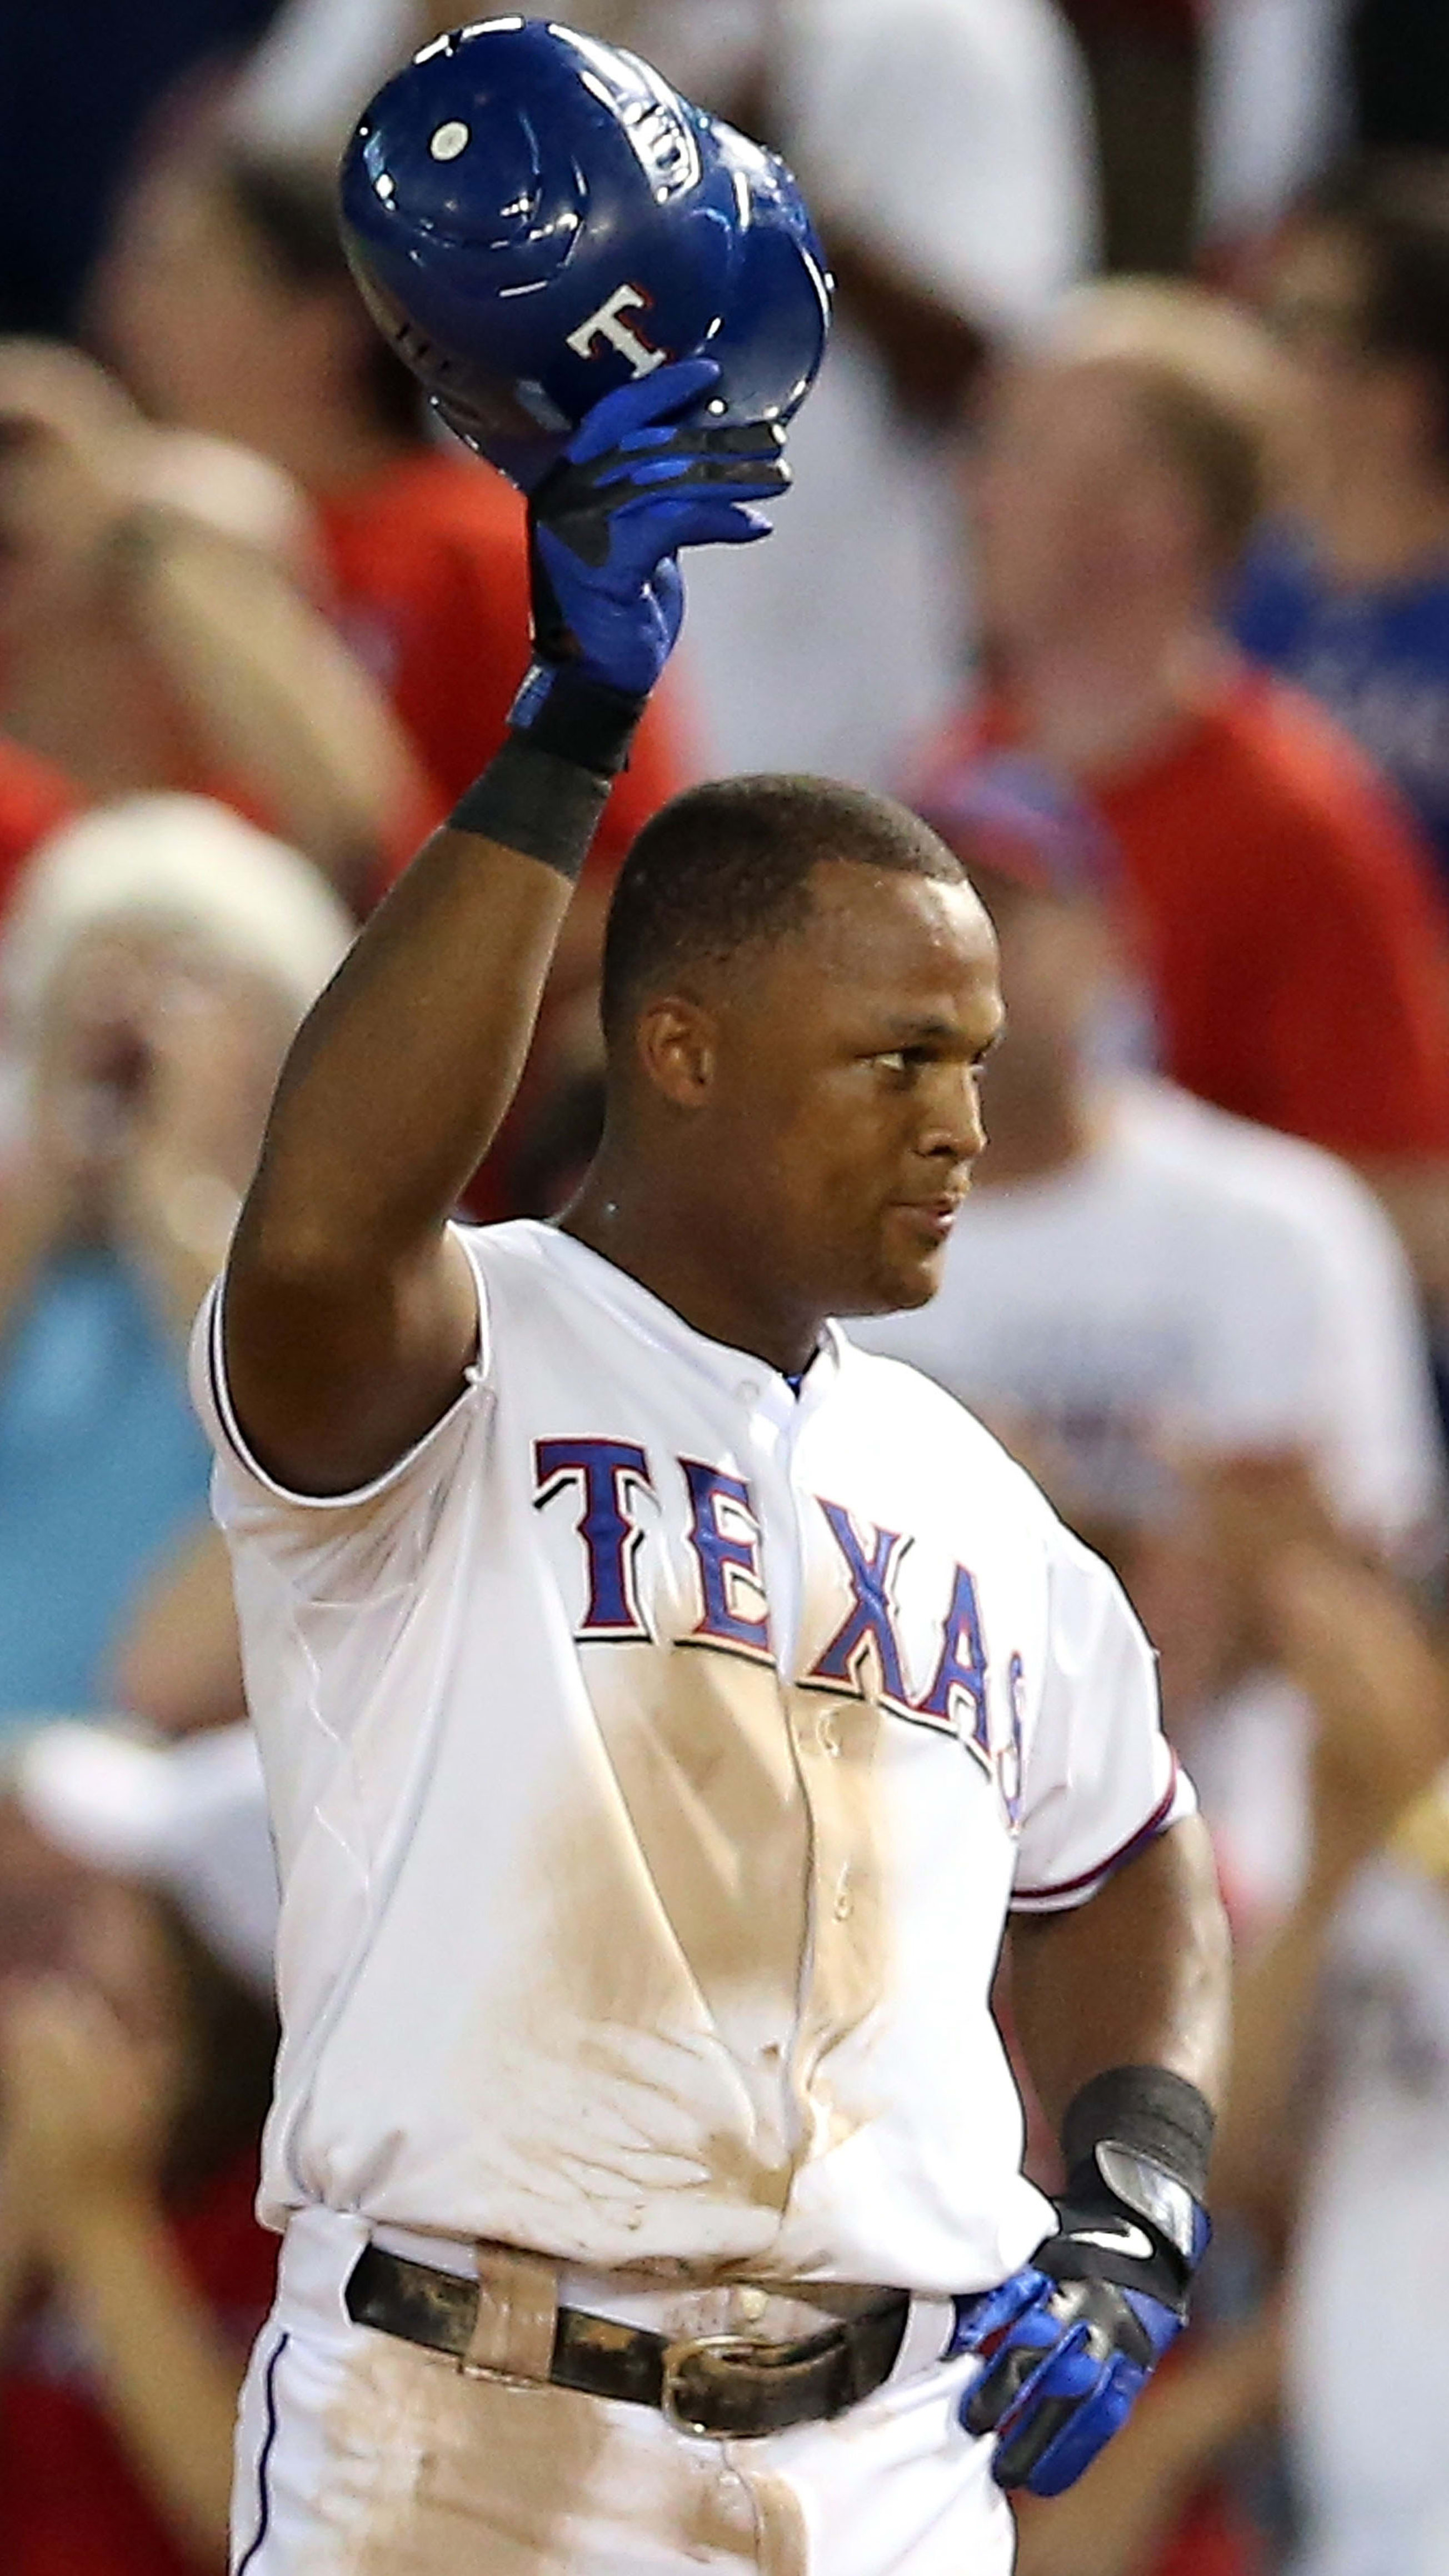 Adrian Beltre becomes first Dominican player to reach 3,000 career hits -  The Globe and Mail